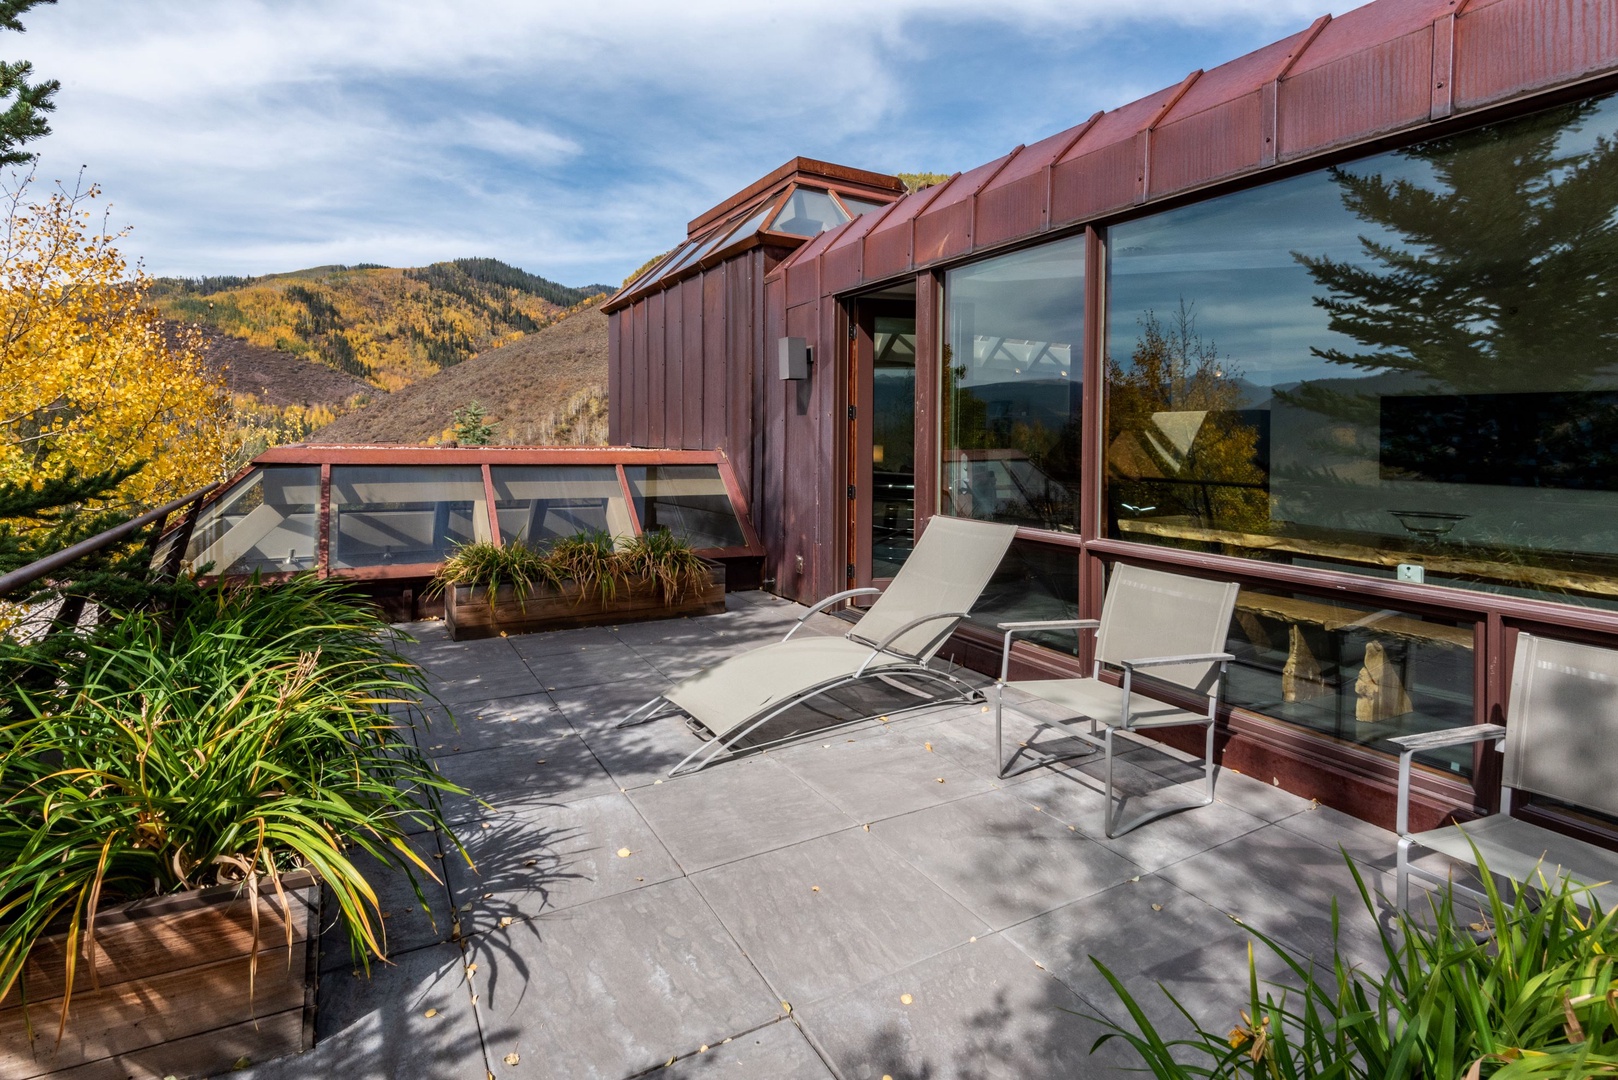 Step outside into the fresh air or take a snooze on the second-level deck